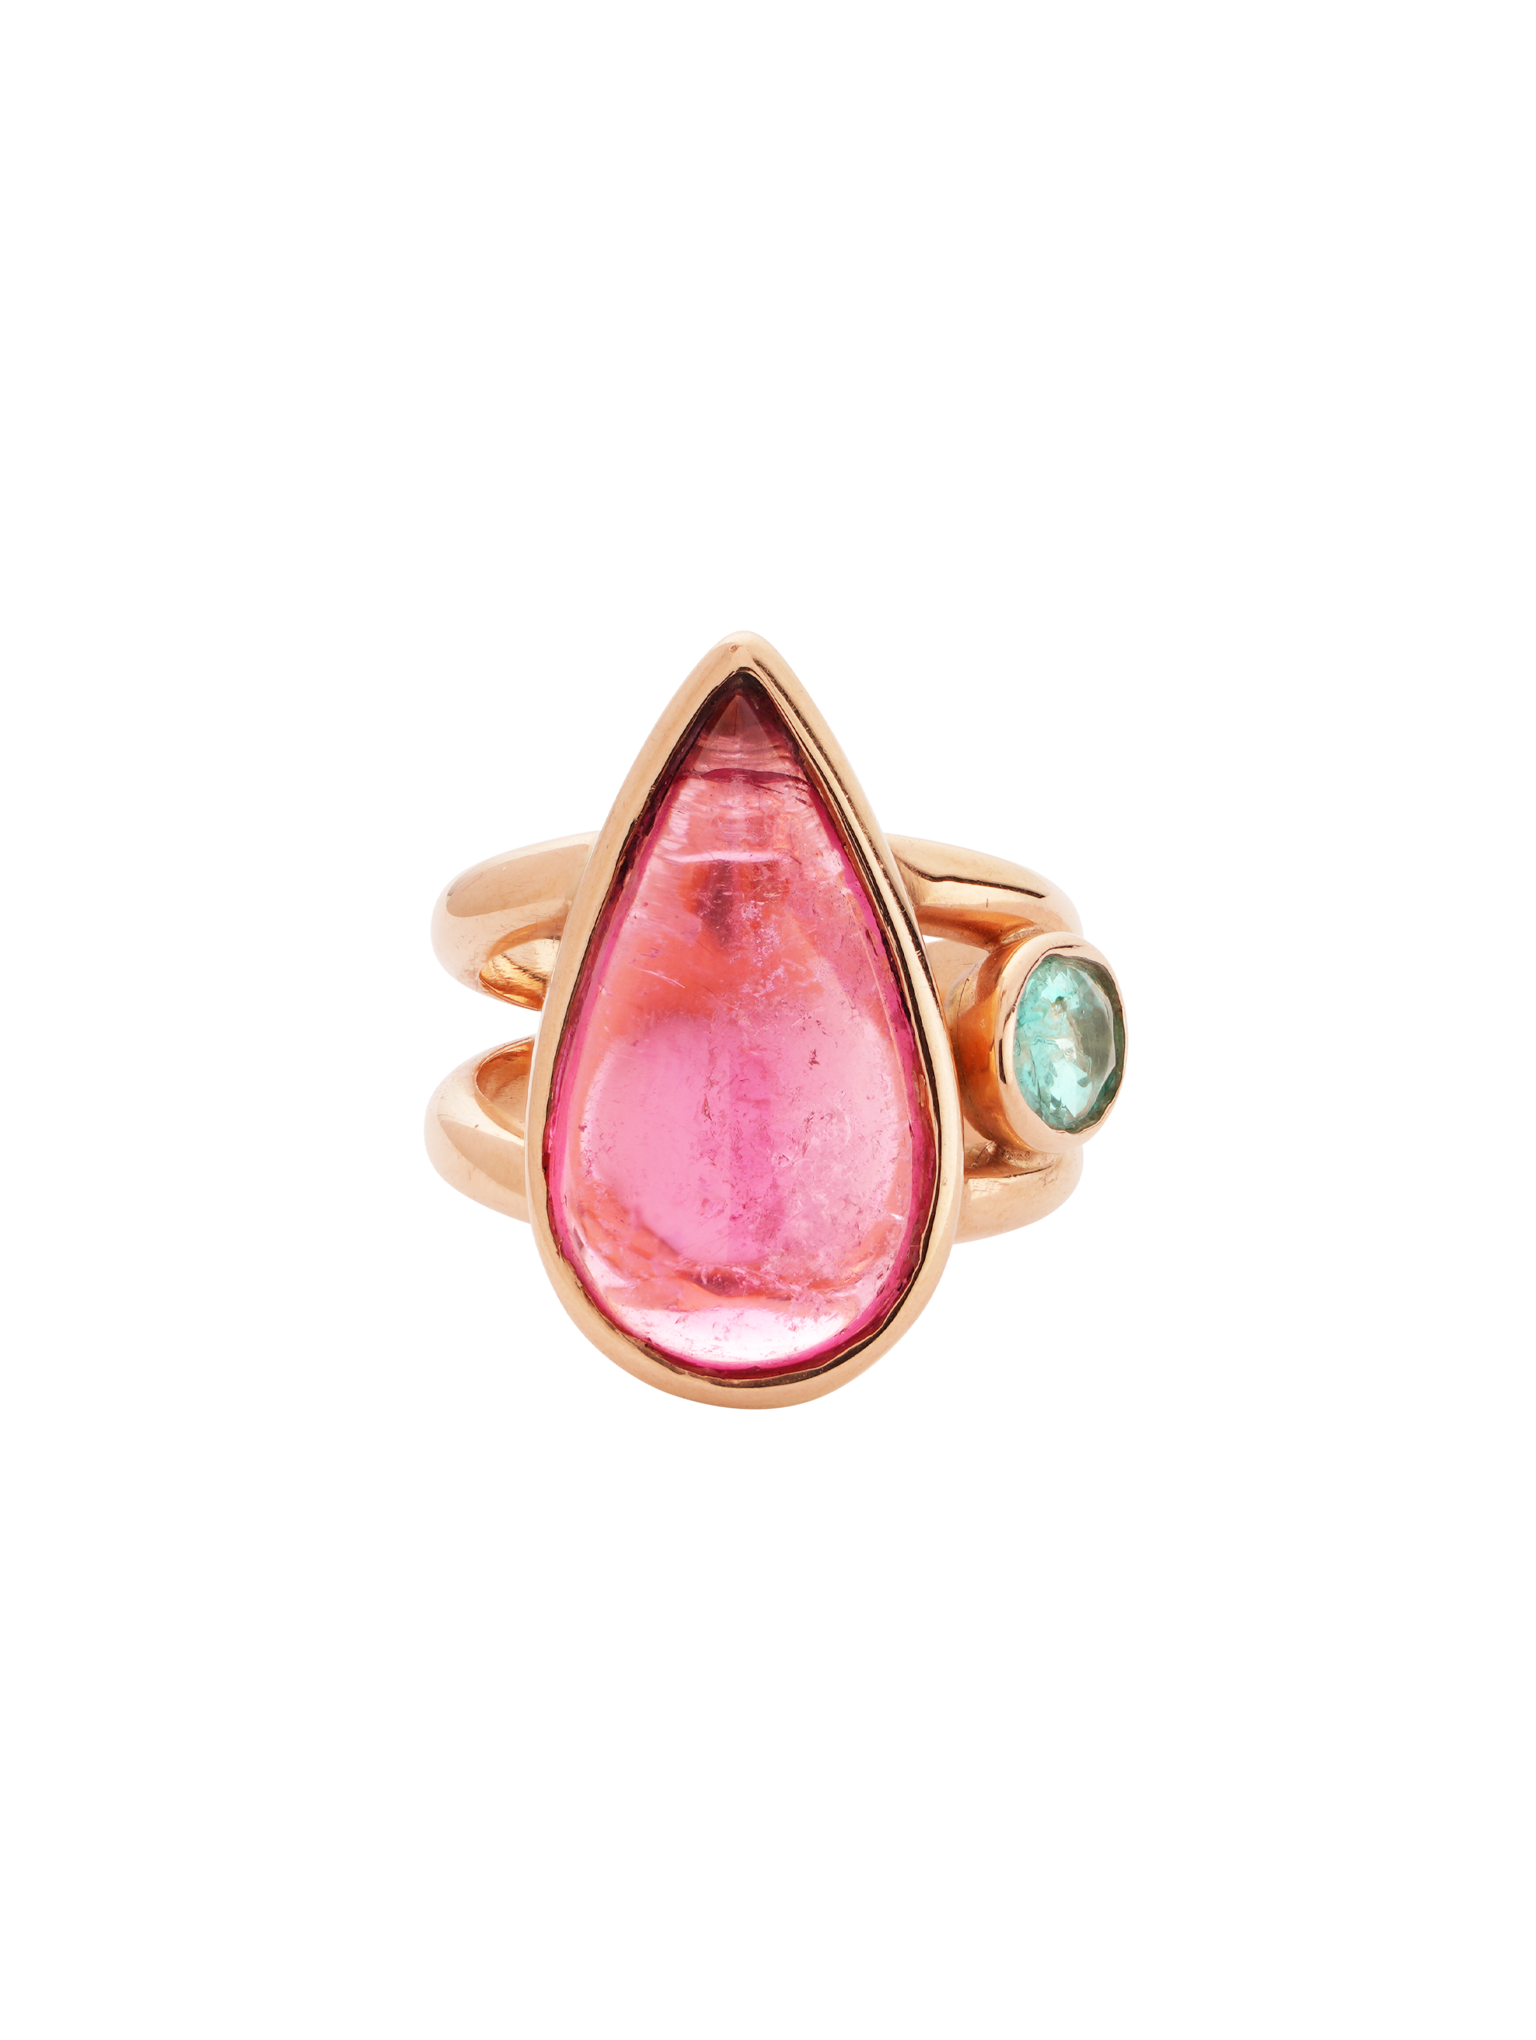 Pear shaped pink tourmaline cabochon and apatite side stone ring